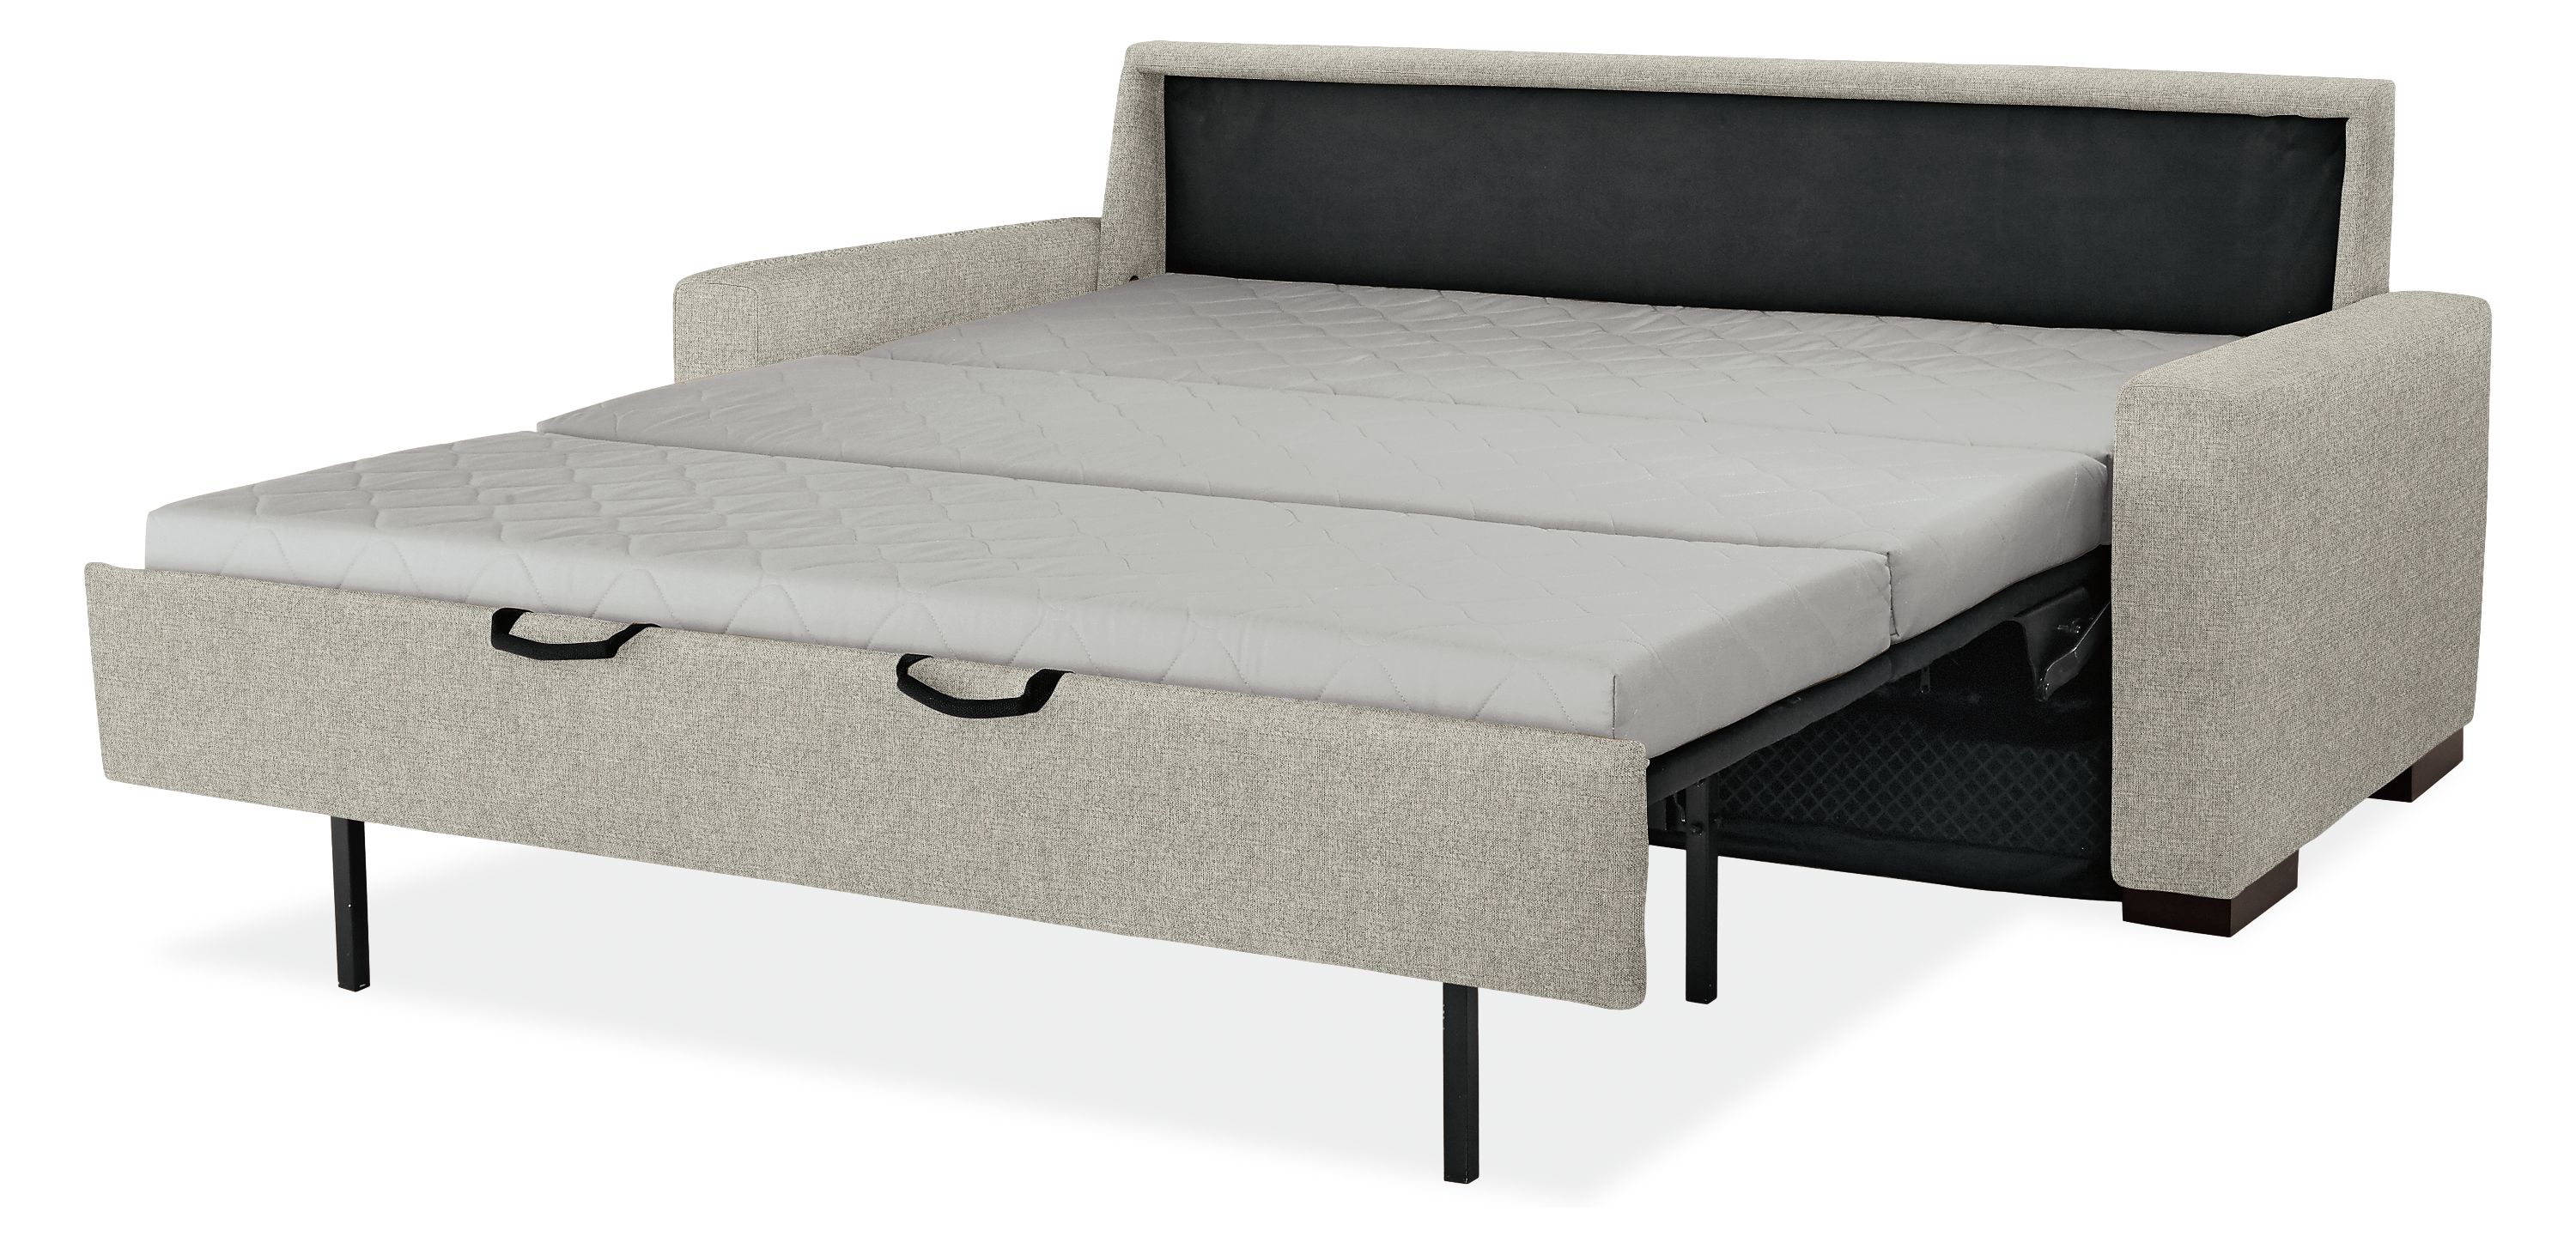 Angled view of Berin sleeper sofa in full open position.